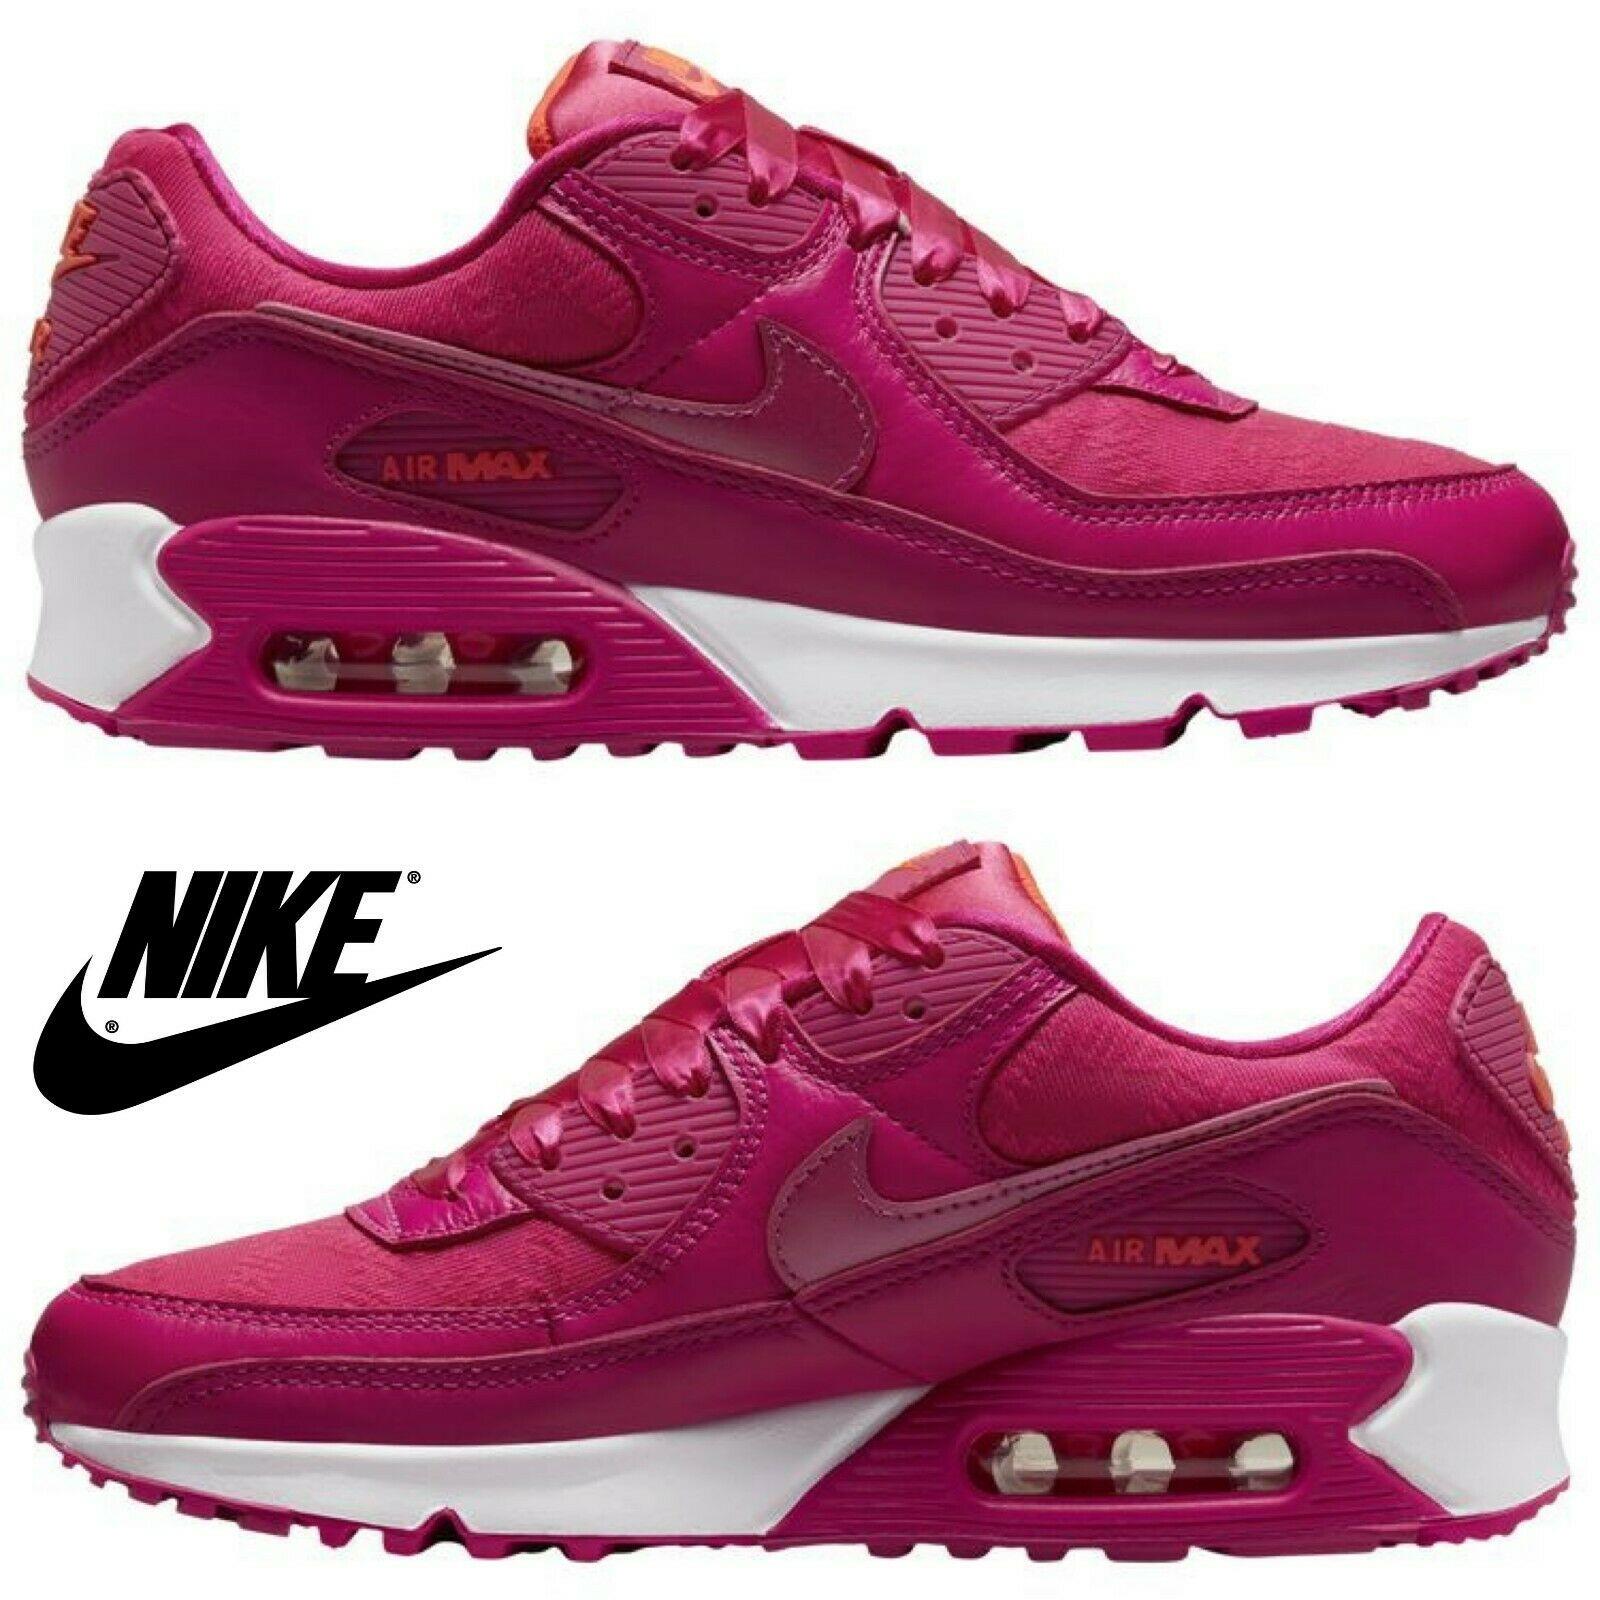 Nike Air Max 90 Women s Sneakers Casual Shoes Premium Running Sport Gym Pink